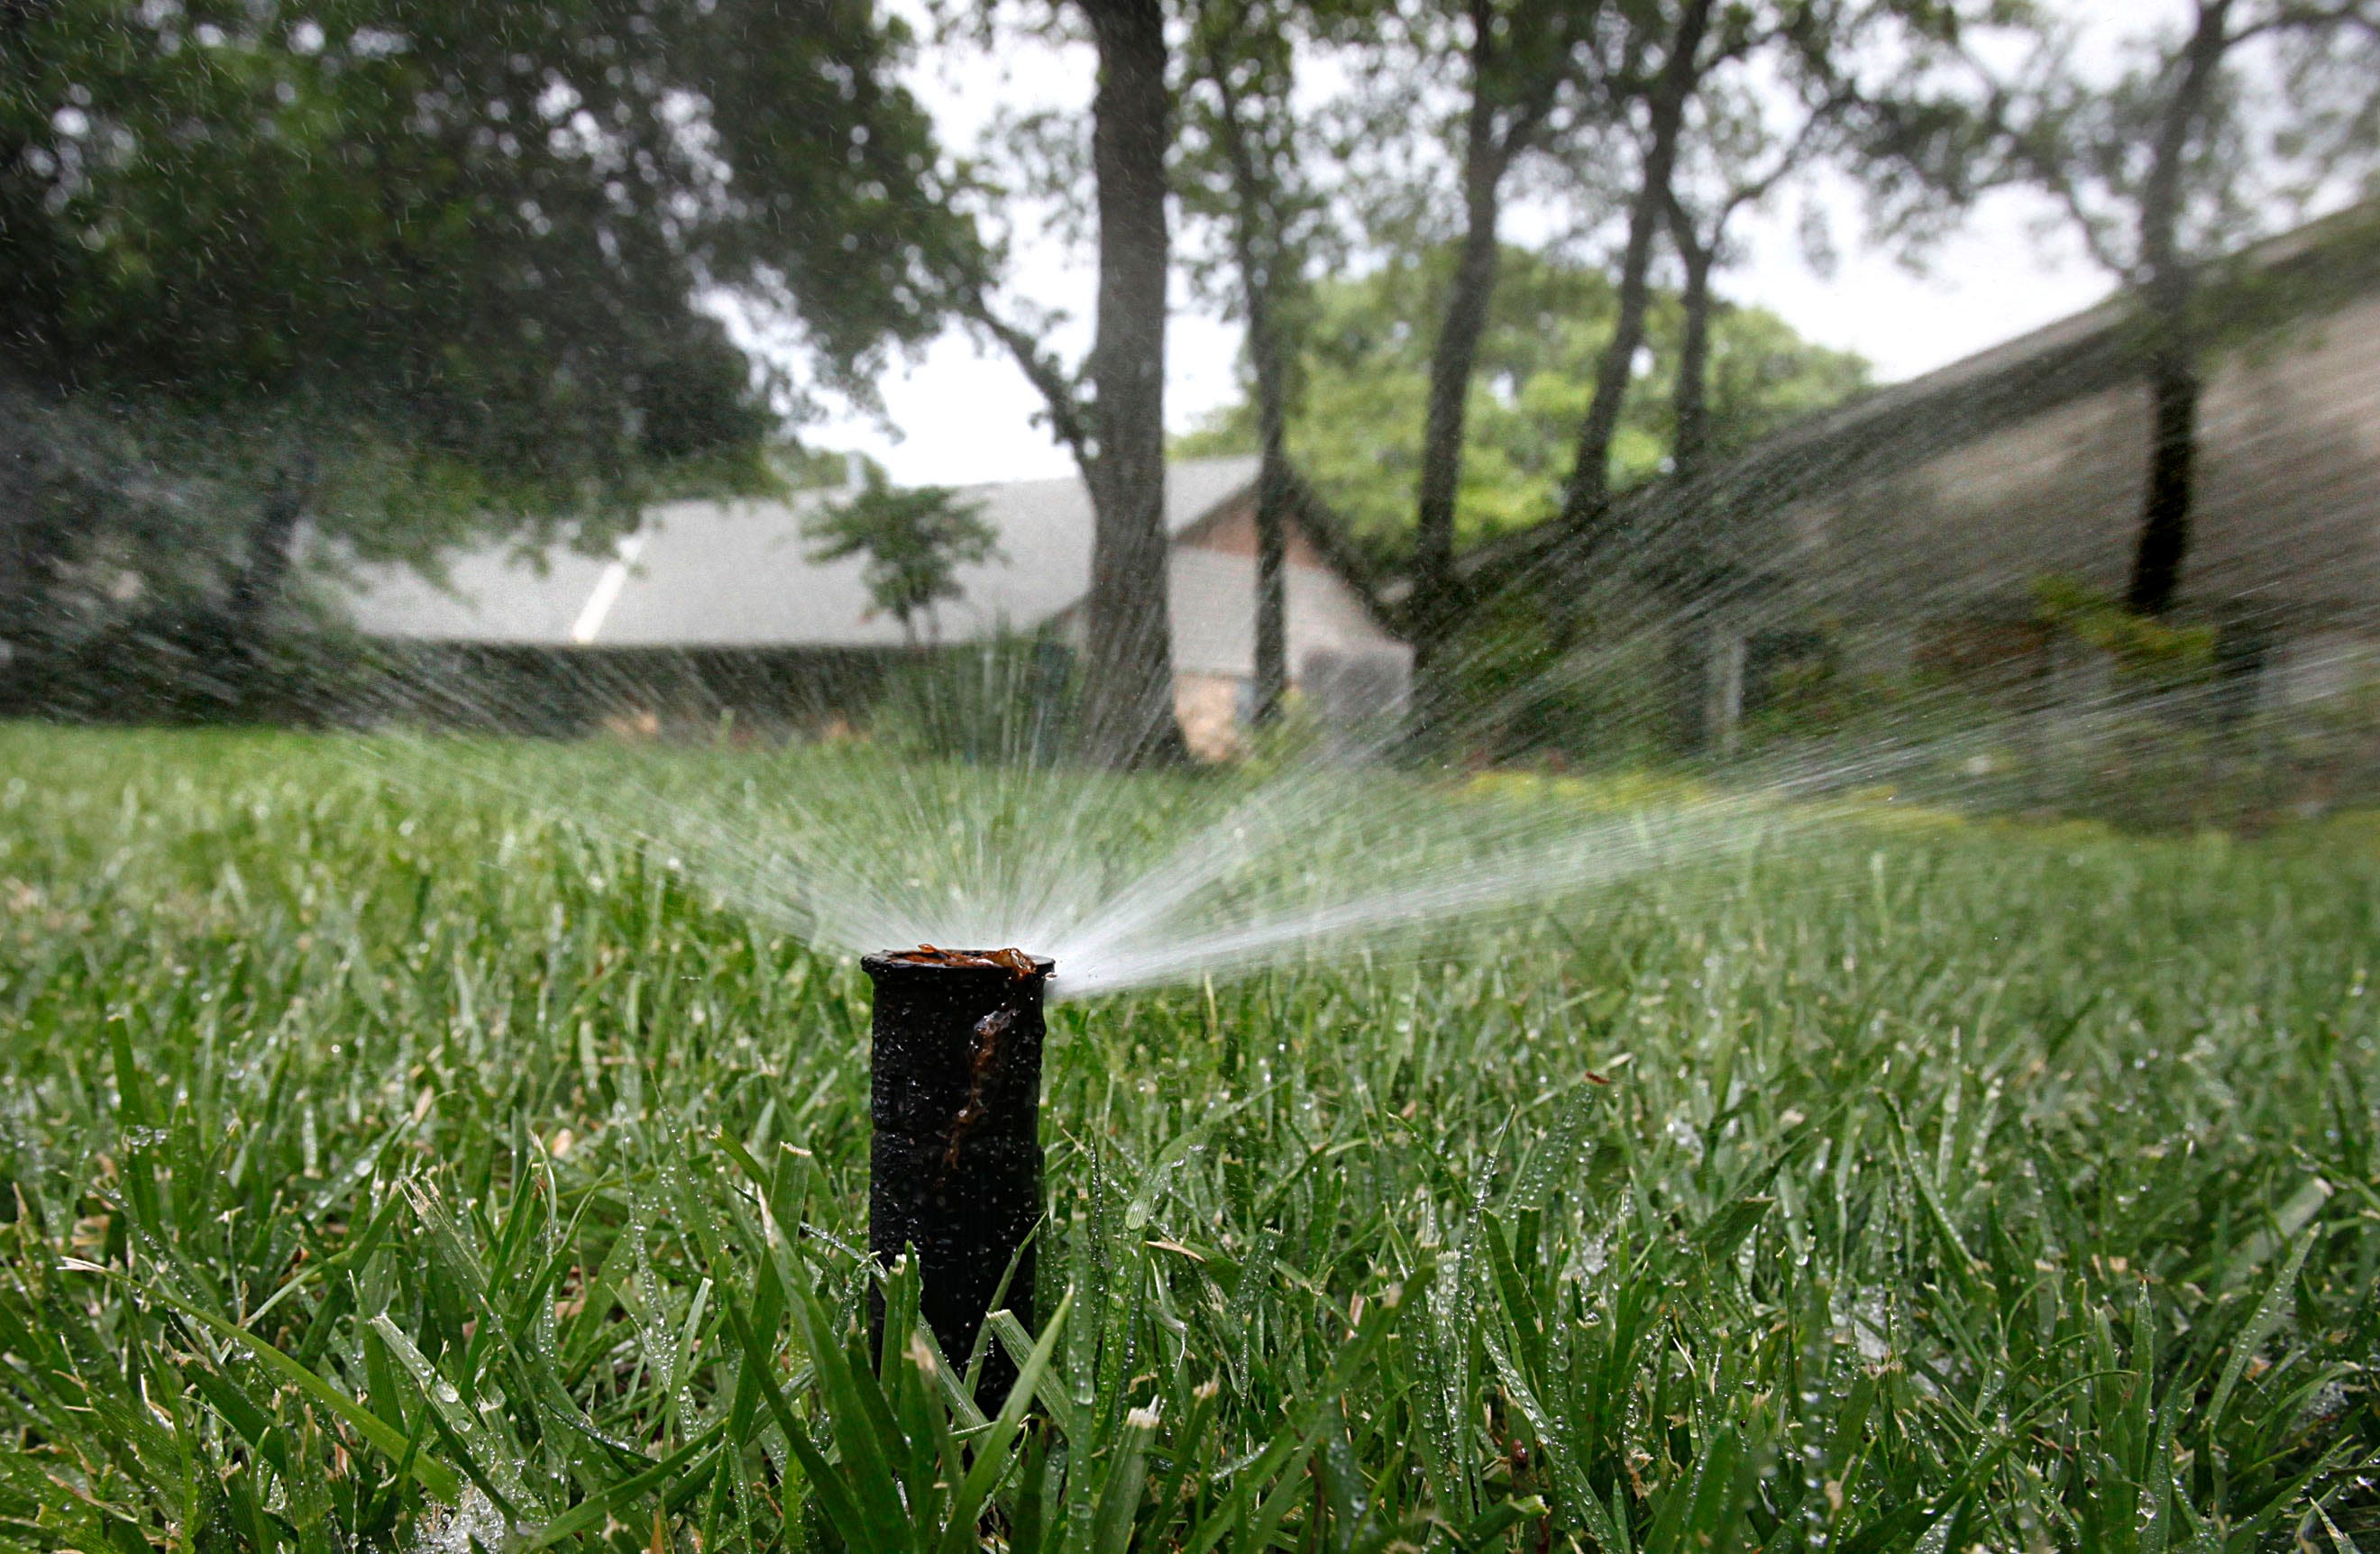 Watering your lawn? OKC city ordinance limits which days residents can use sprinklers